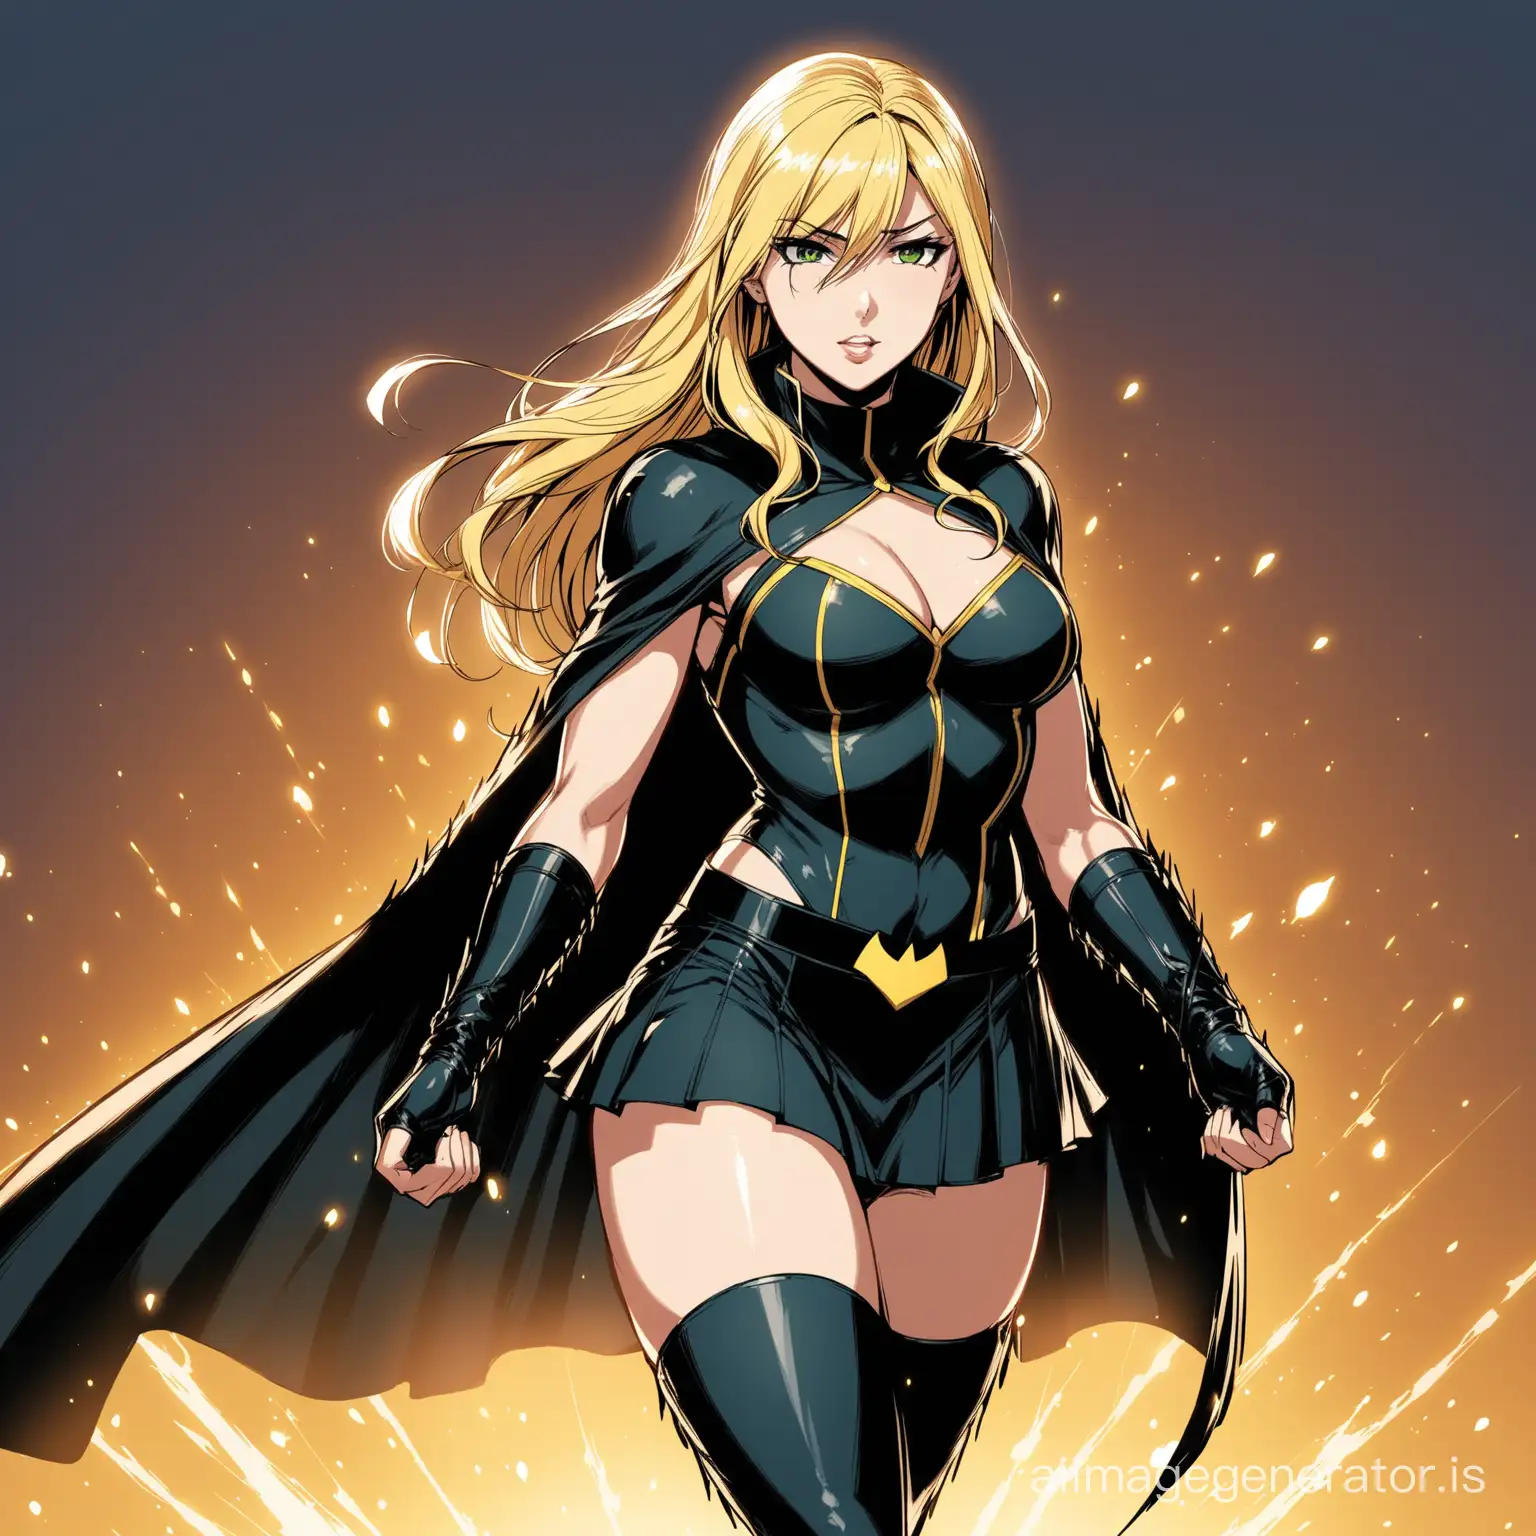 hot anime girl in black canary costume with no shoulder covering and a skirt wearing a cape